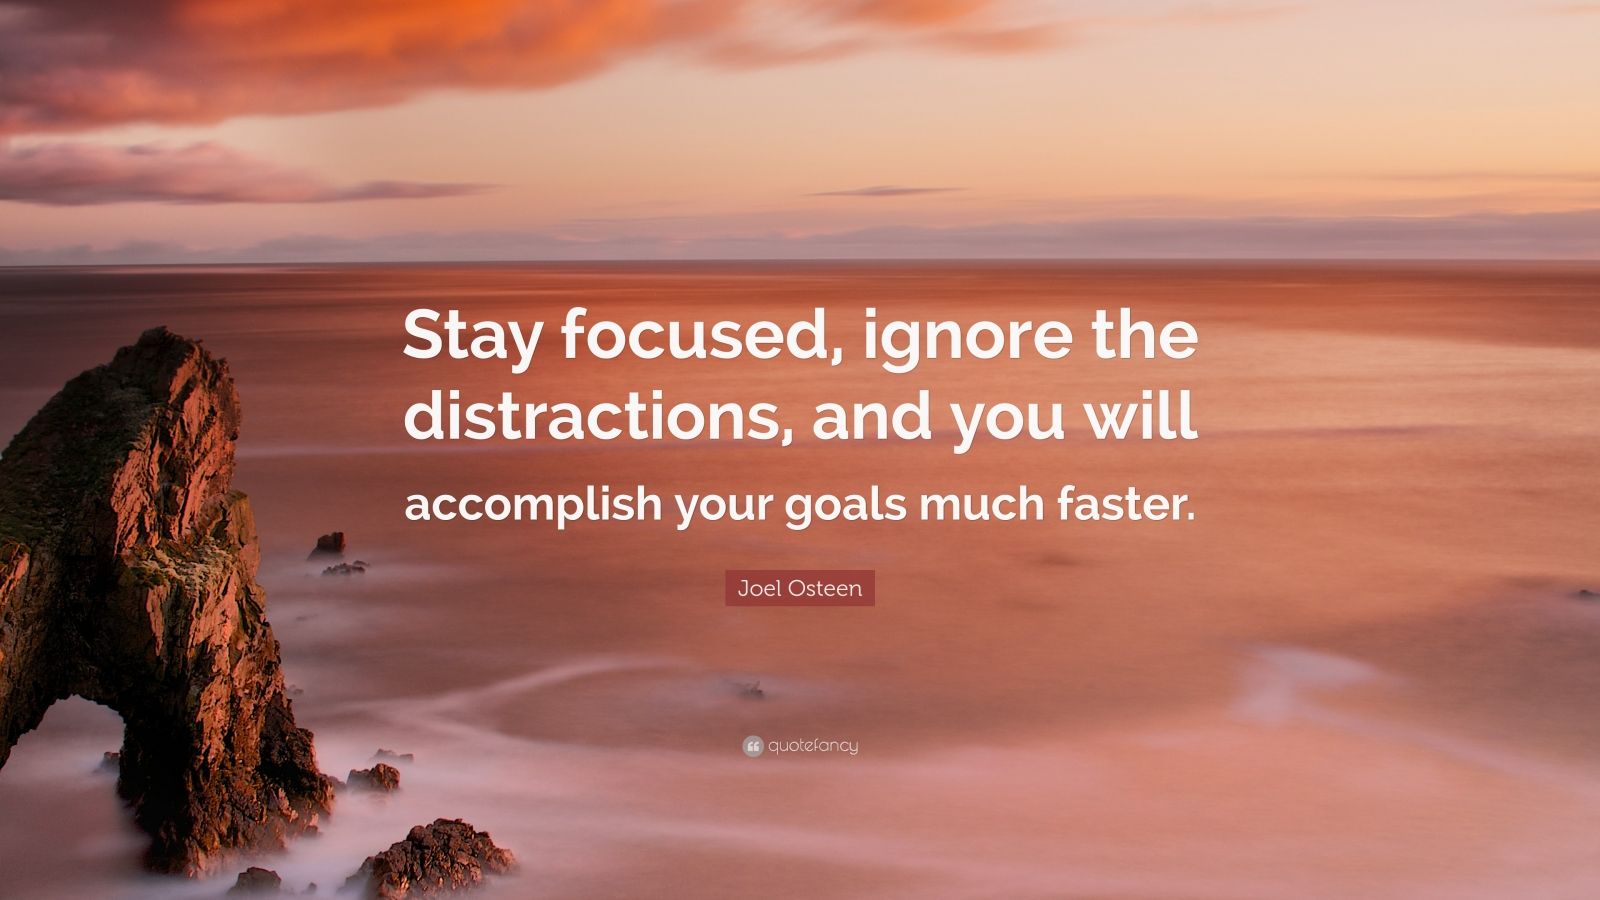 Joel Osteen Quote: “Stay focused, ignore the distractions, and you will